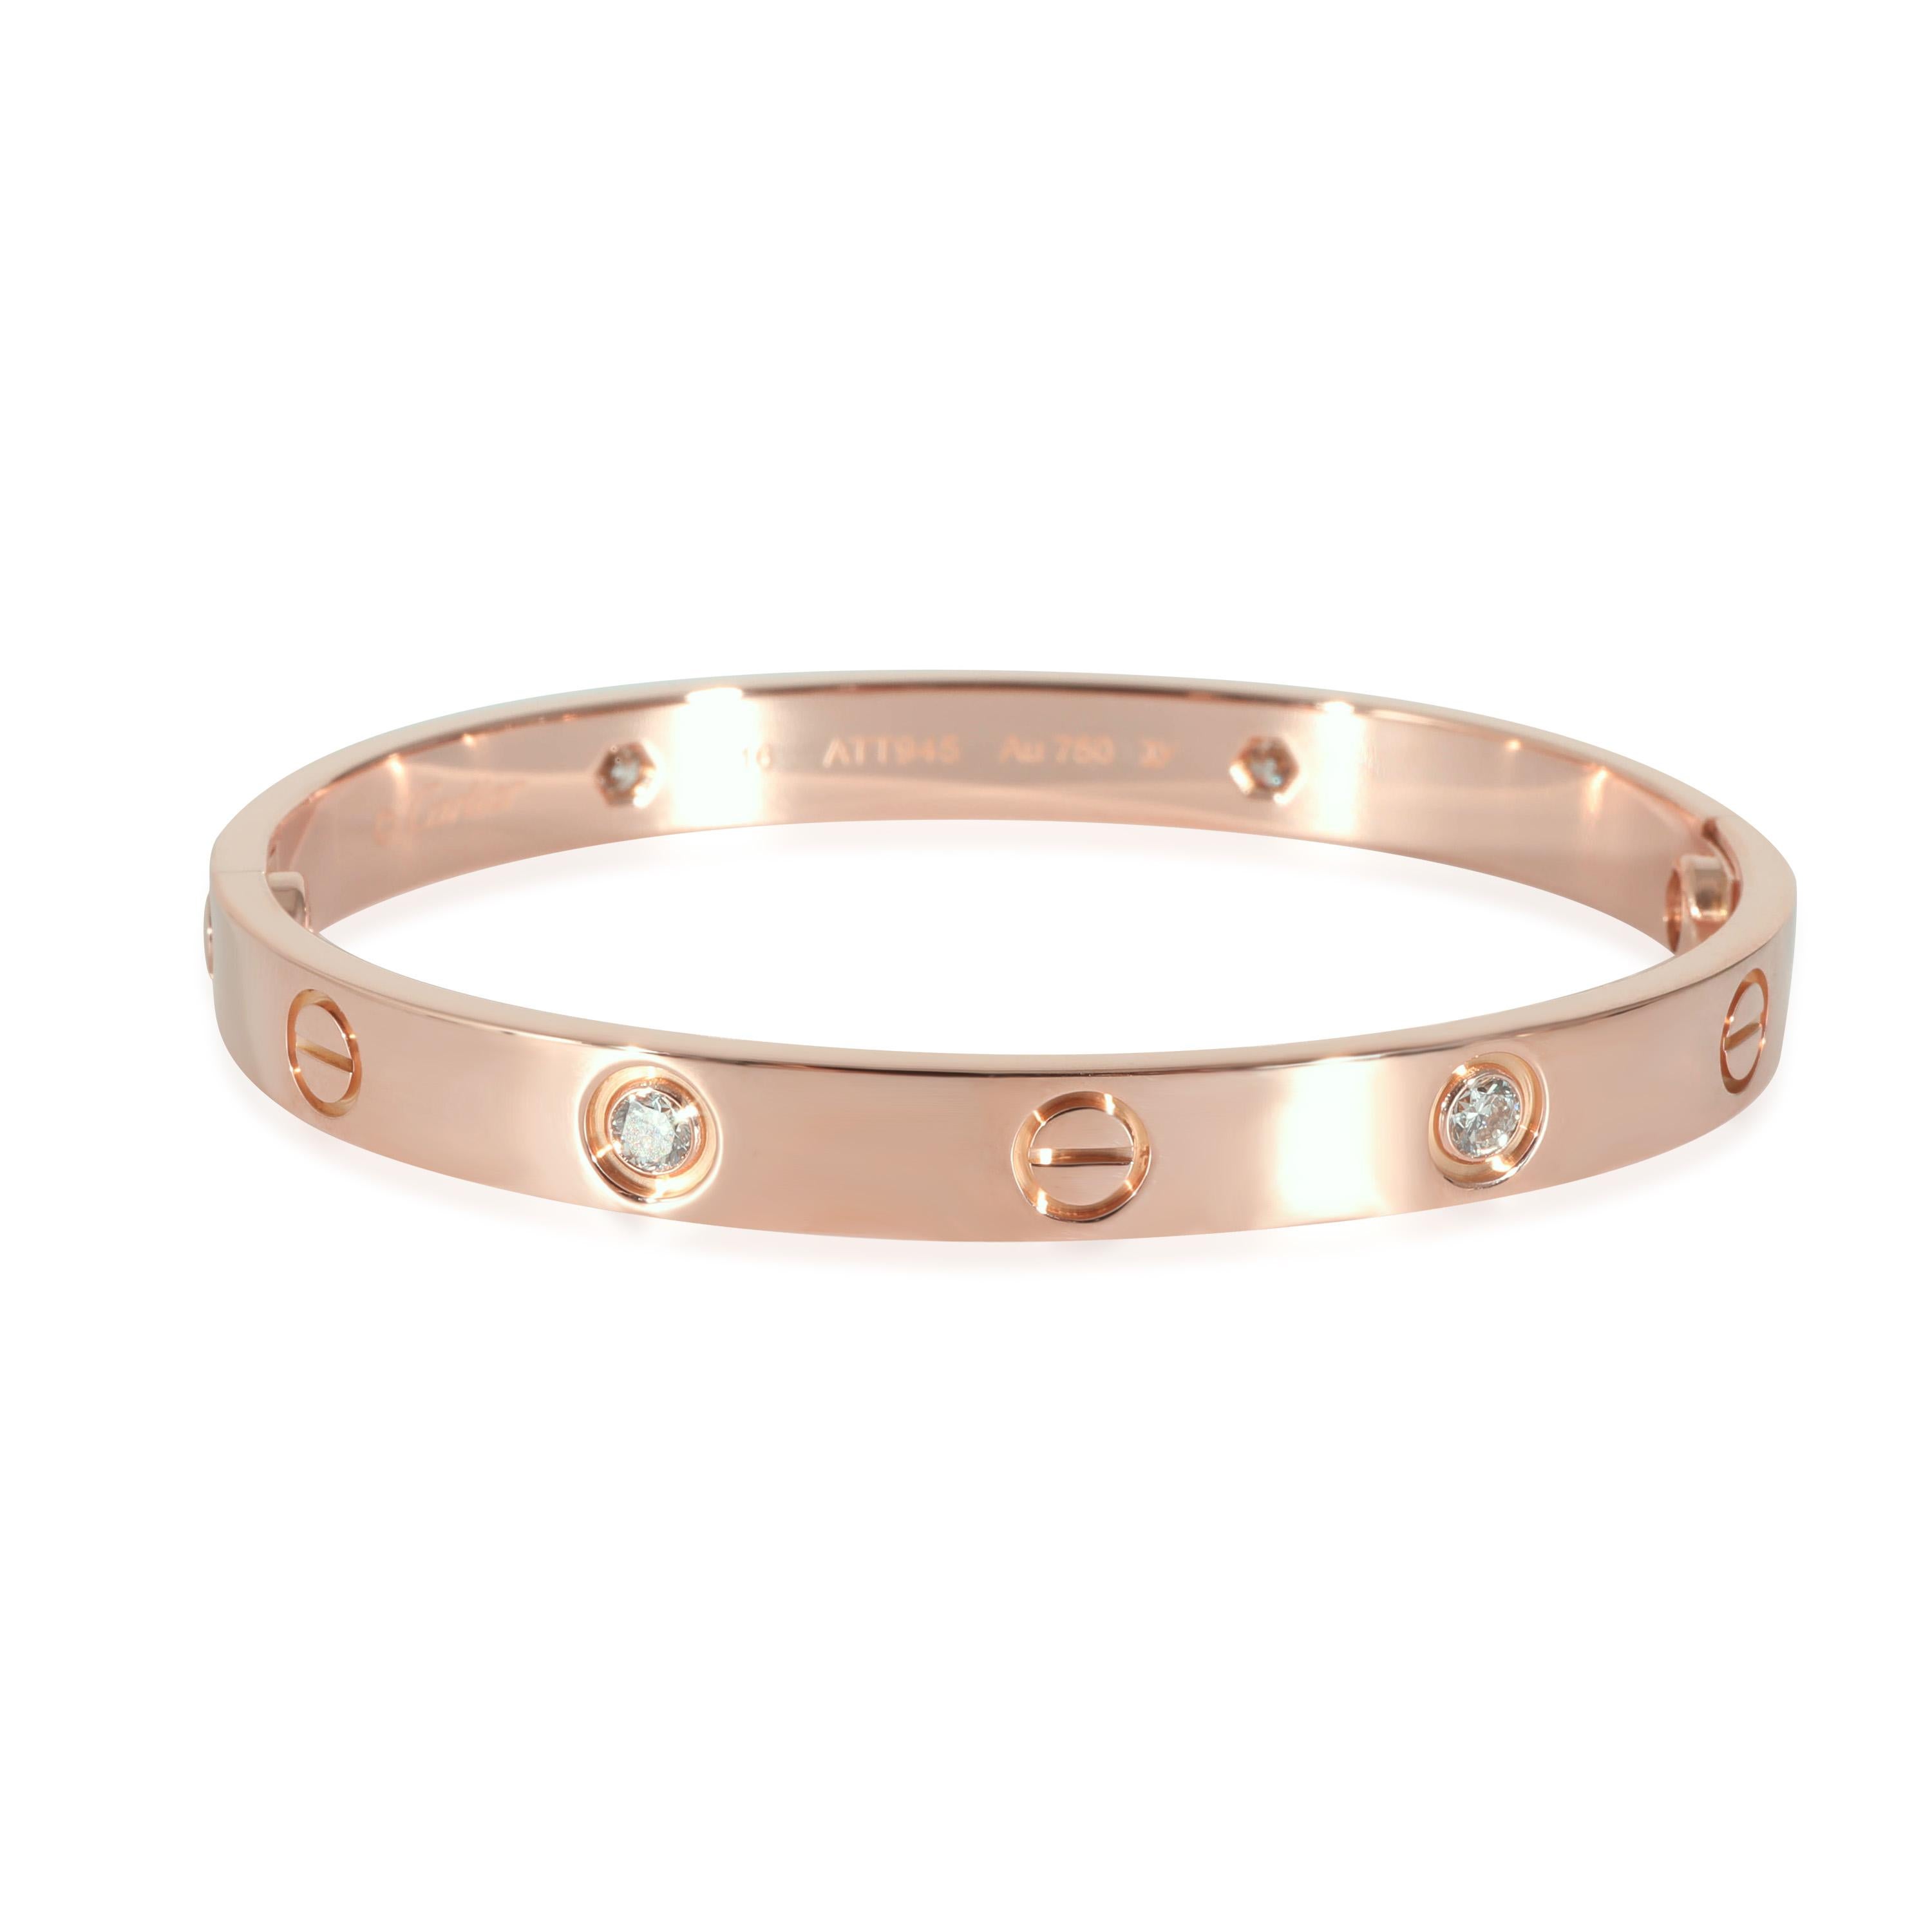 Cartier Love Diamond Bracelet in 18k Rose Gold 0.42 CTW

PRIMARY DETAILS
SKU: 131617
Listing Title: Cartier Love Diamond Bracelet in 18k Rose Gold 0.42 CTW
Condition Description: Cartier's Love collection is the epitome of iconic, from the